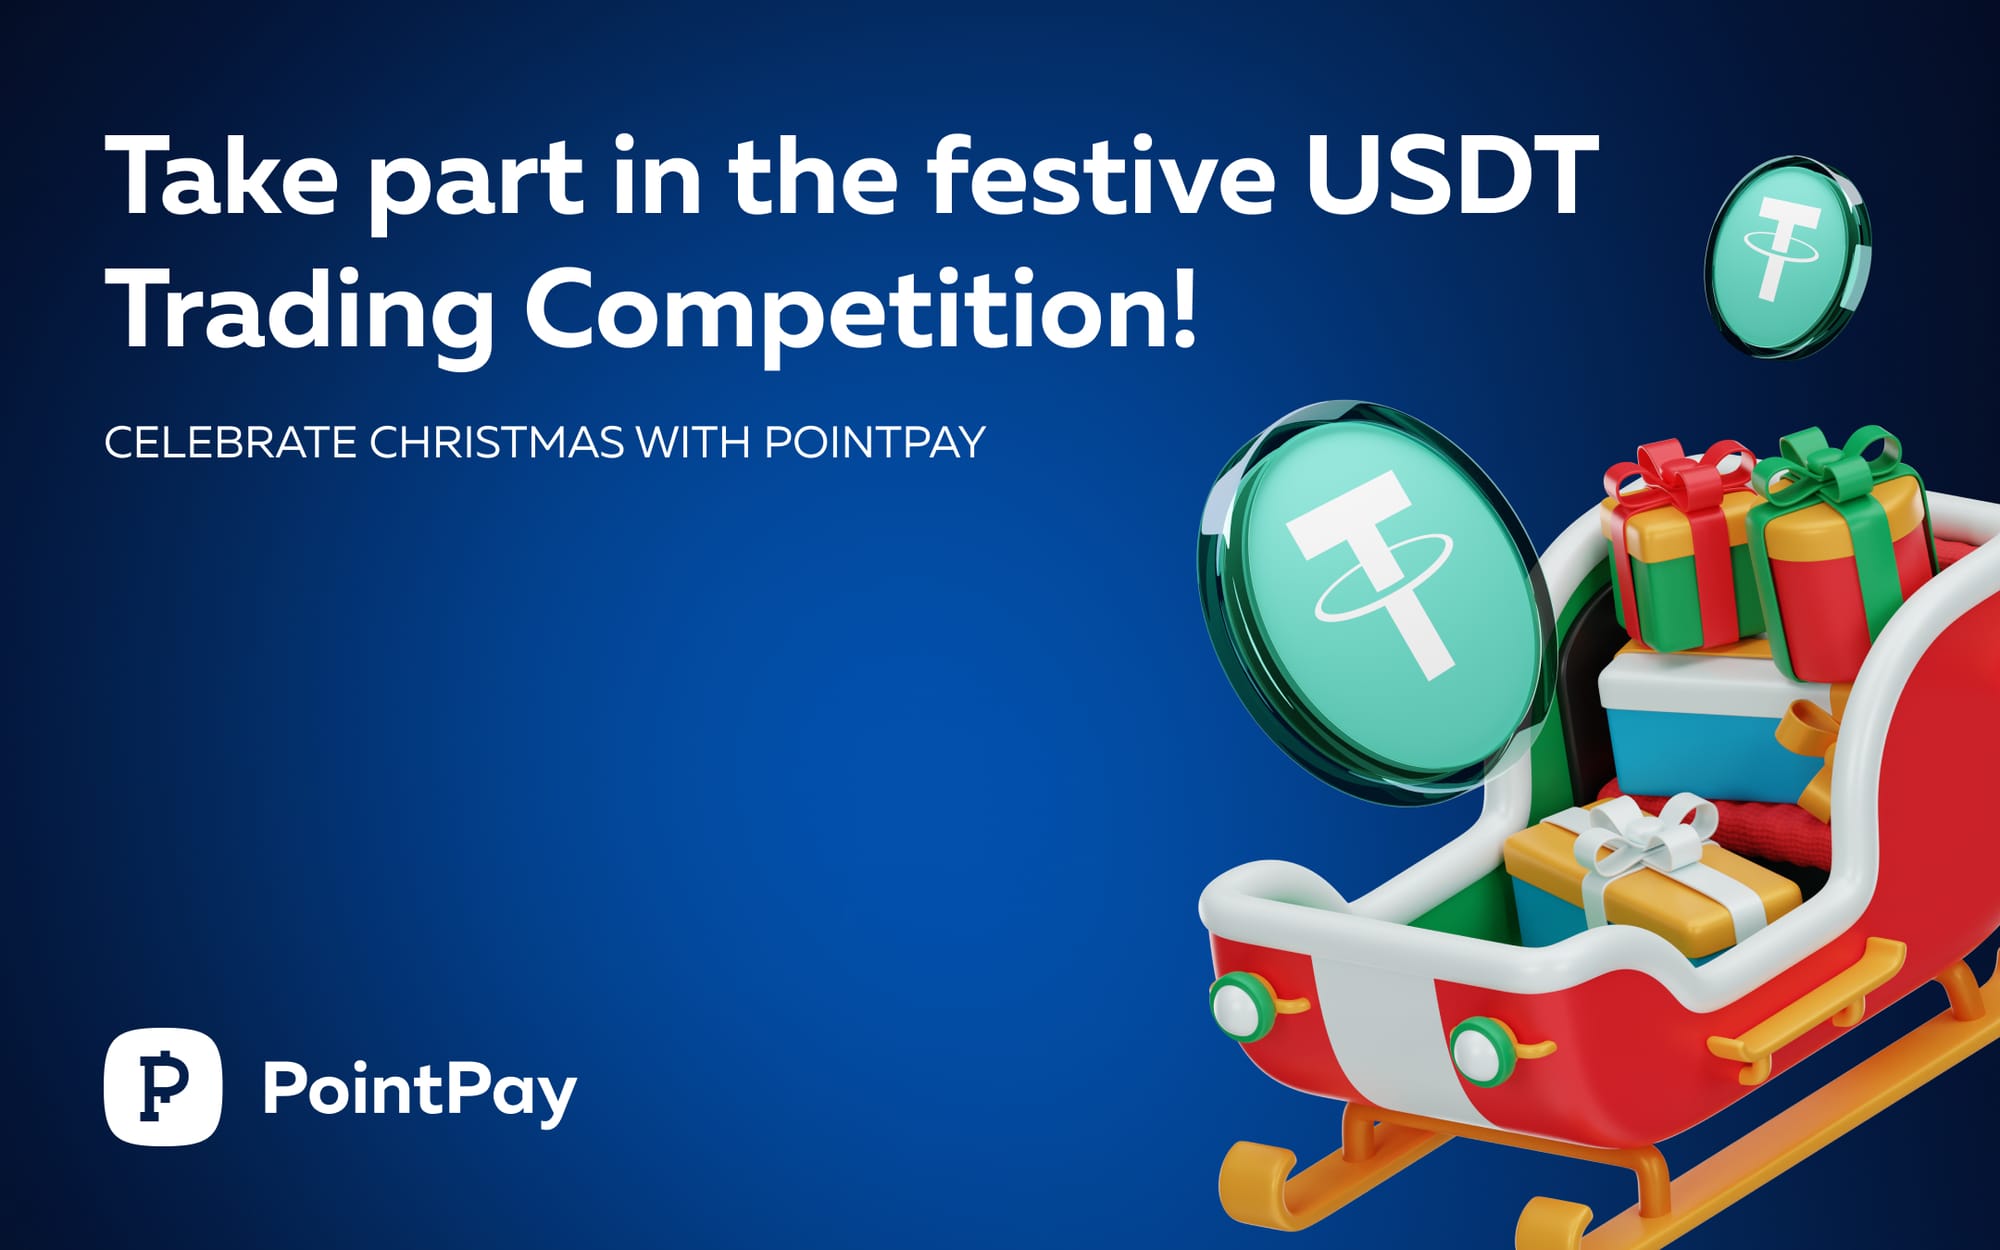 Christmas USDT Trading Competition at PointPay!